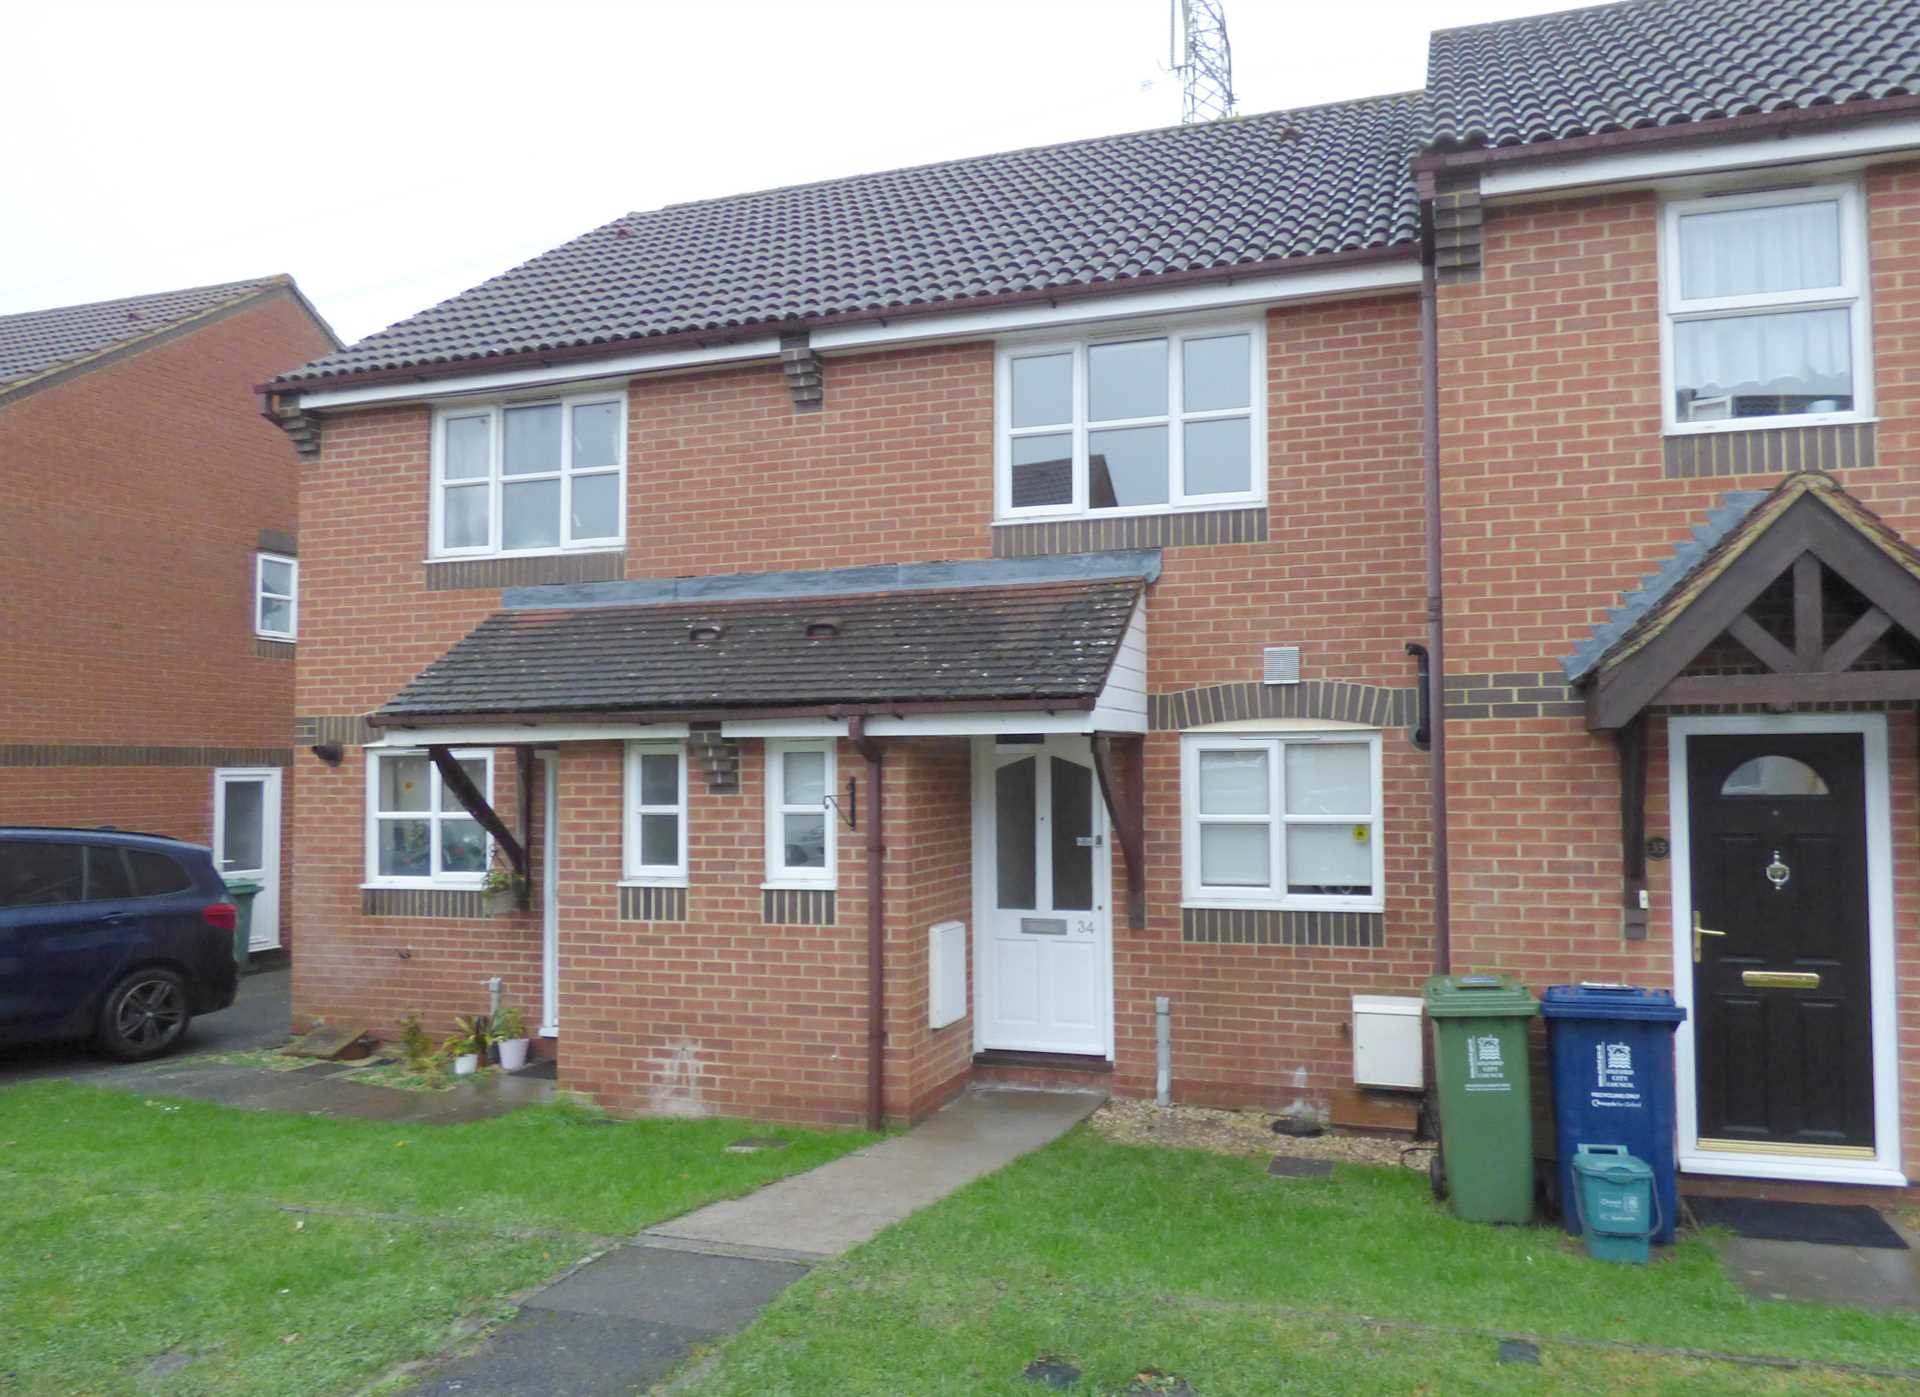 2 bed House (unspecified) for rent in Oxford. From Abbey Group Property Management Ltd